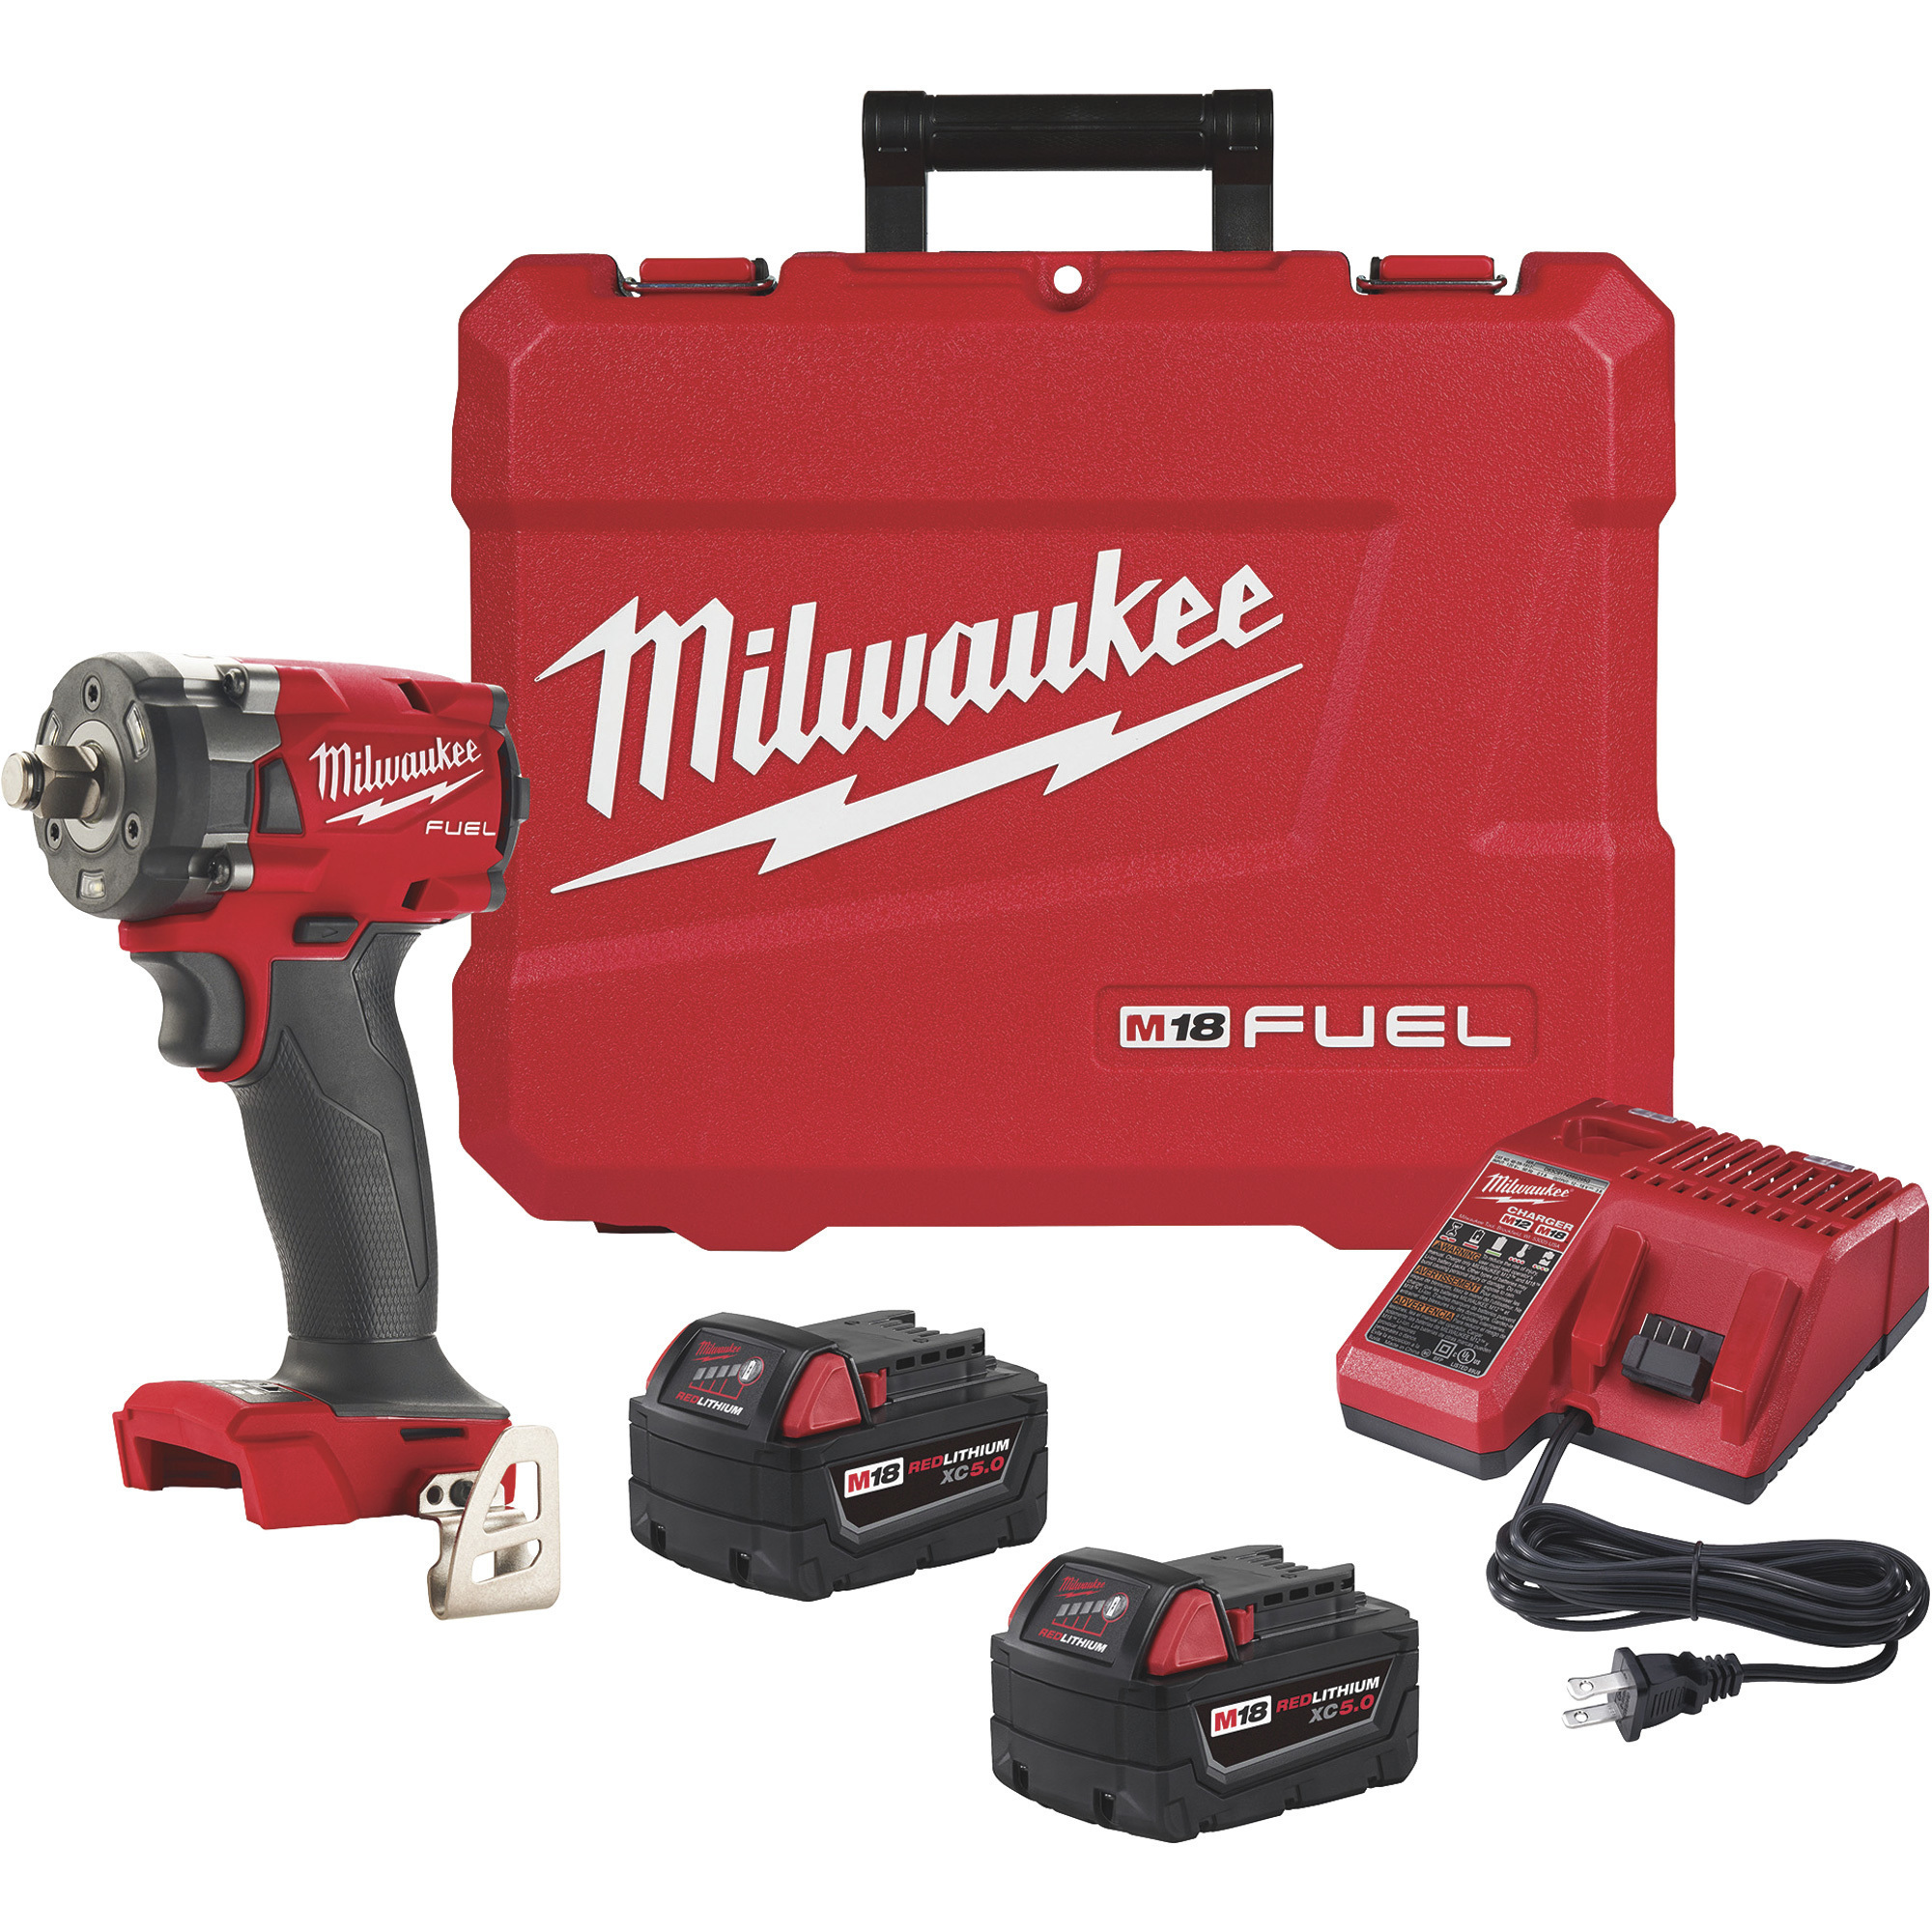 Milwaukee M18 FUEL Compact Impact Wrench with Friction Ring Kit, 1/2Inch Drive, 250 Ft./Lbs. Torque, 2 Batteries, Charger and Case, Model 2855-22R